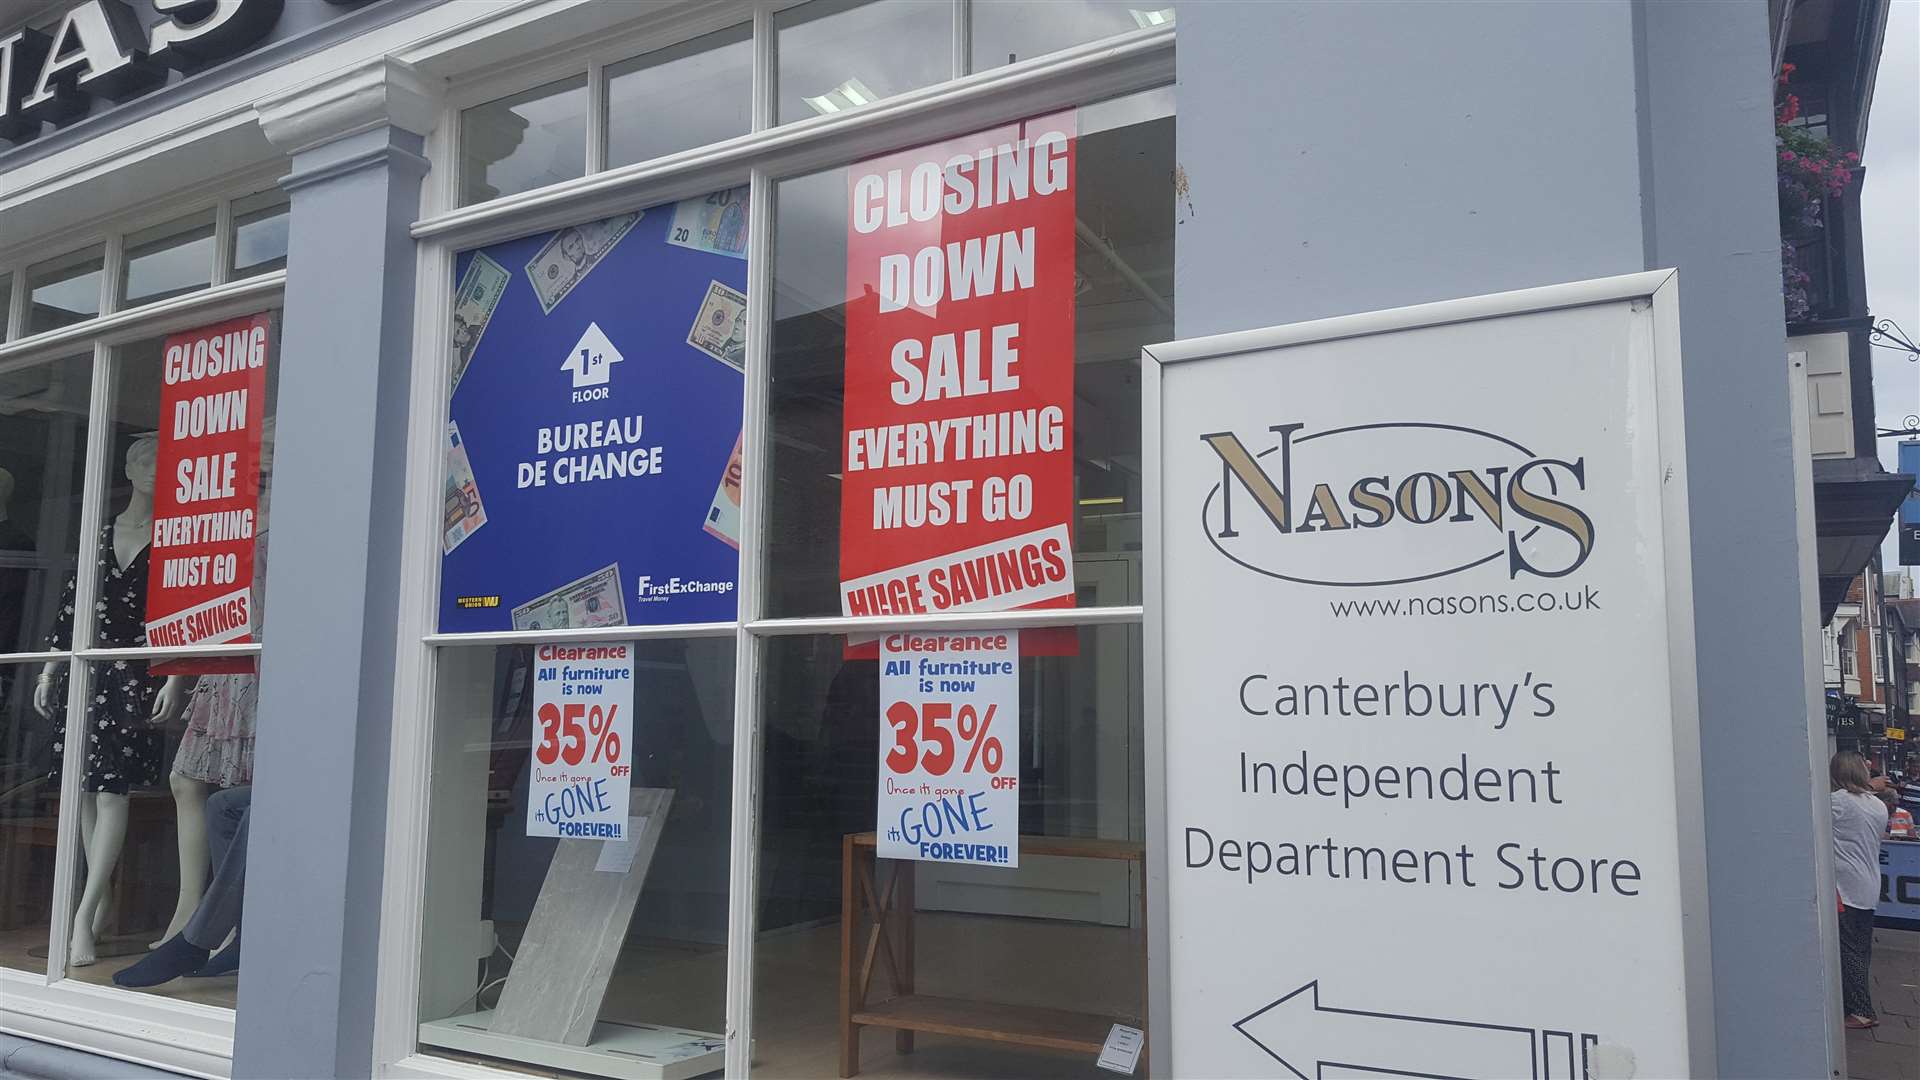 Nasons closing down sale led up to its doors closing for the final time